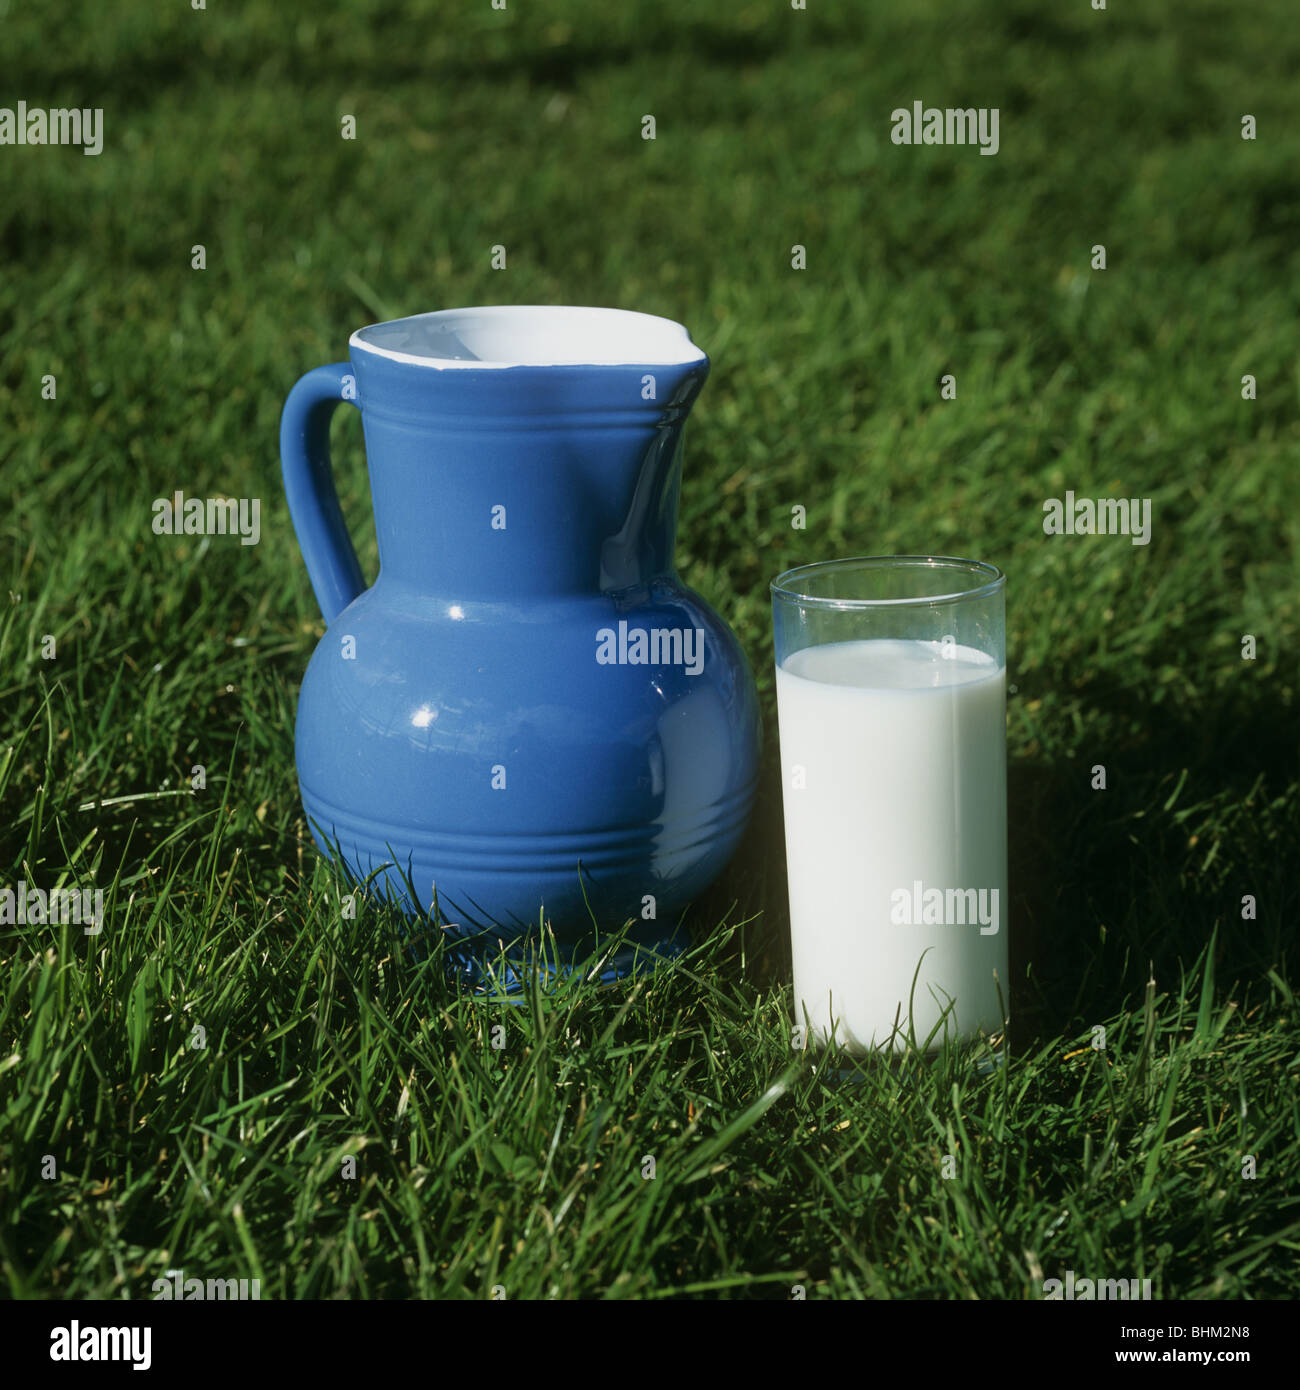 A blue and white jug and a glass of milk standing in a grass pasture Stock Photo